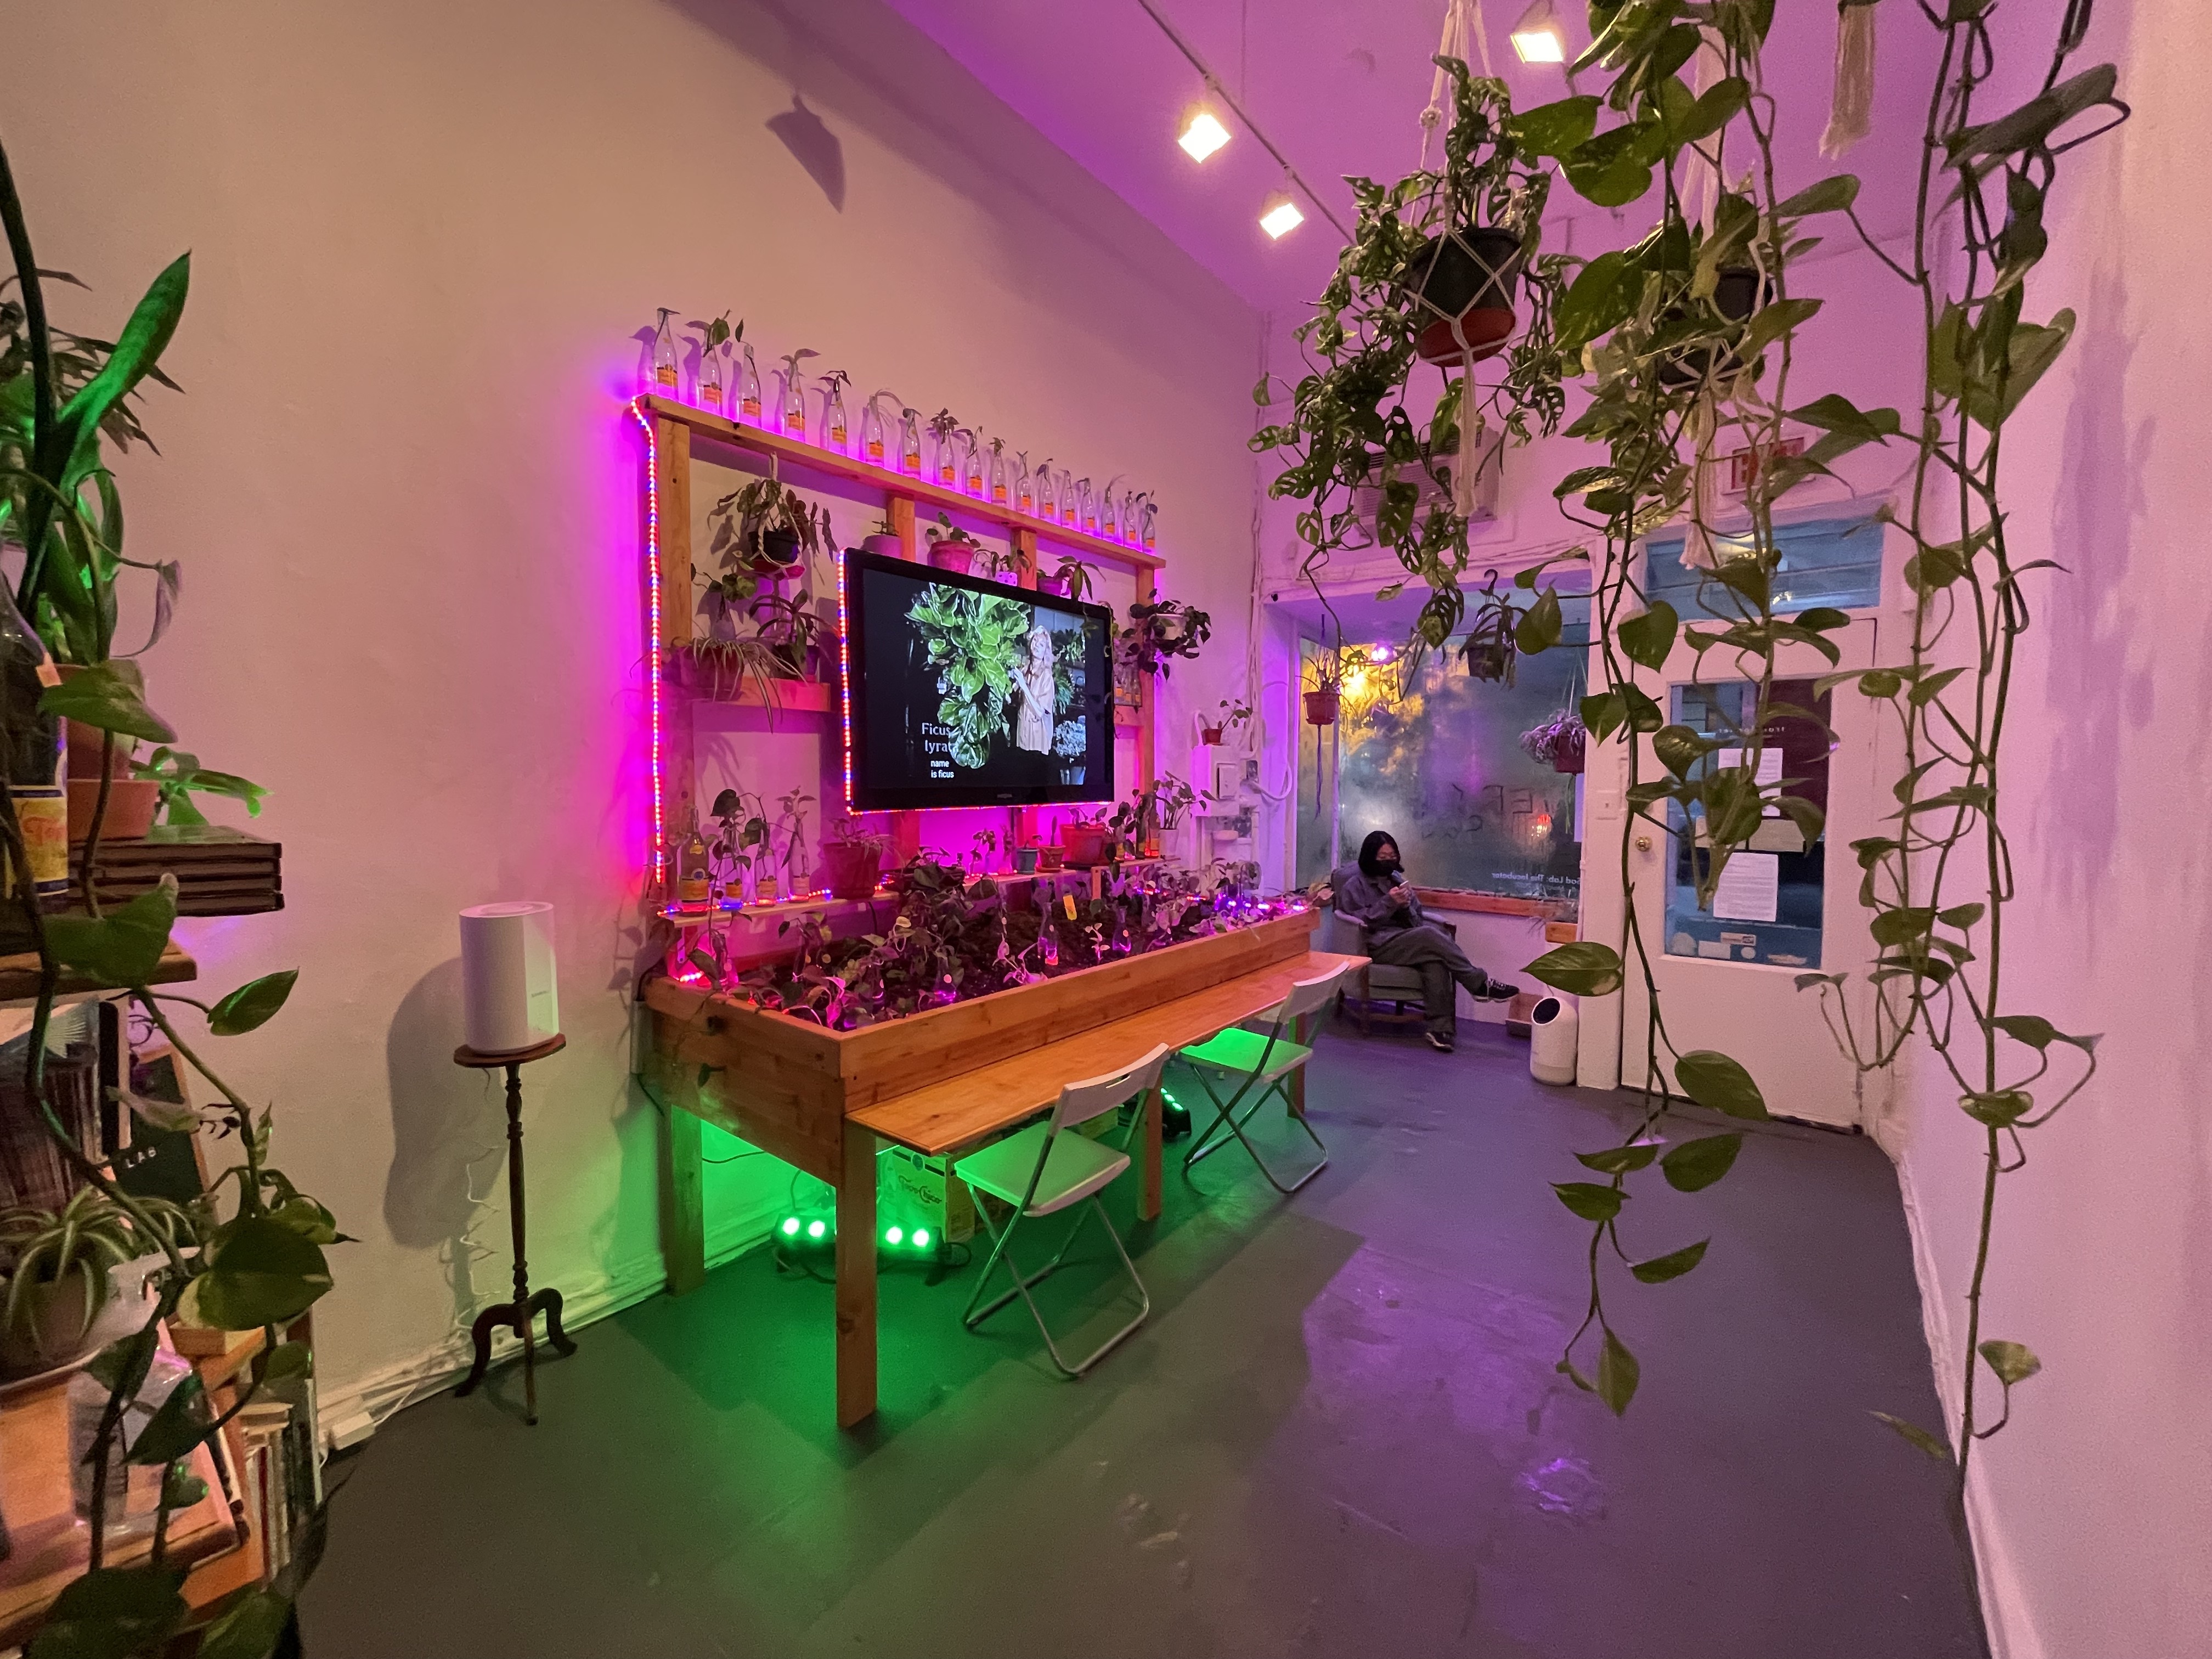 An installation view of a tiny gallery space shows a long wood desk and shelving set up against one wall, holding jars and pots of plant clippings with a flat screen TV mounted to the wall in the center. This space is backlit with purple and green neon lights. The space's front windows are hazy at dusk. A woman sits in a chair at the window reading something.